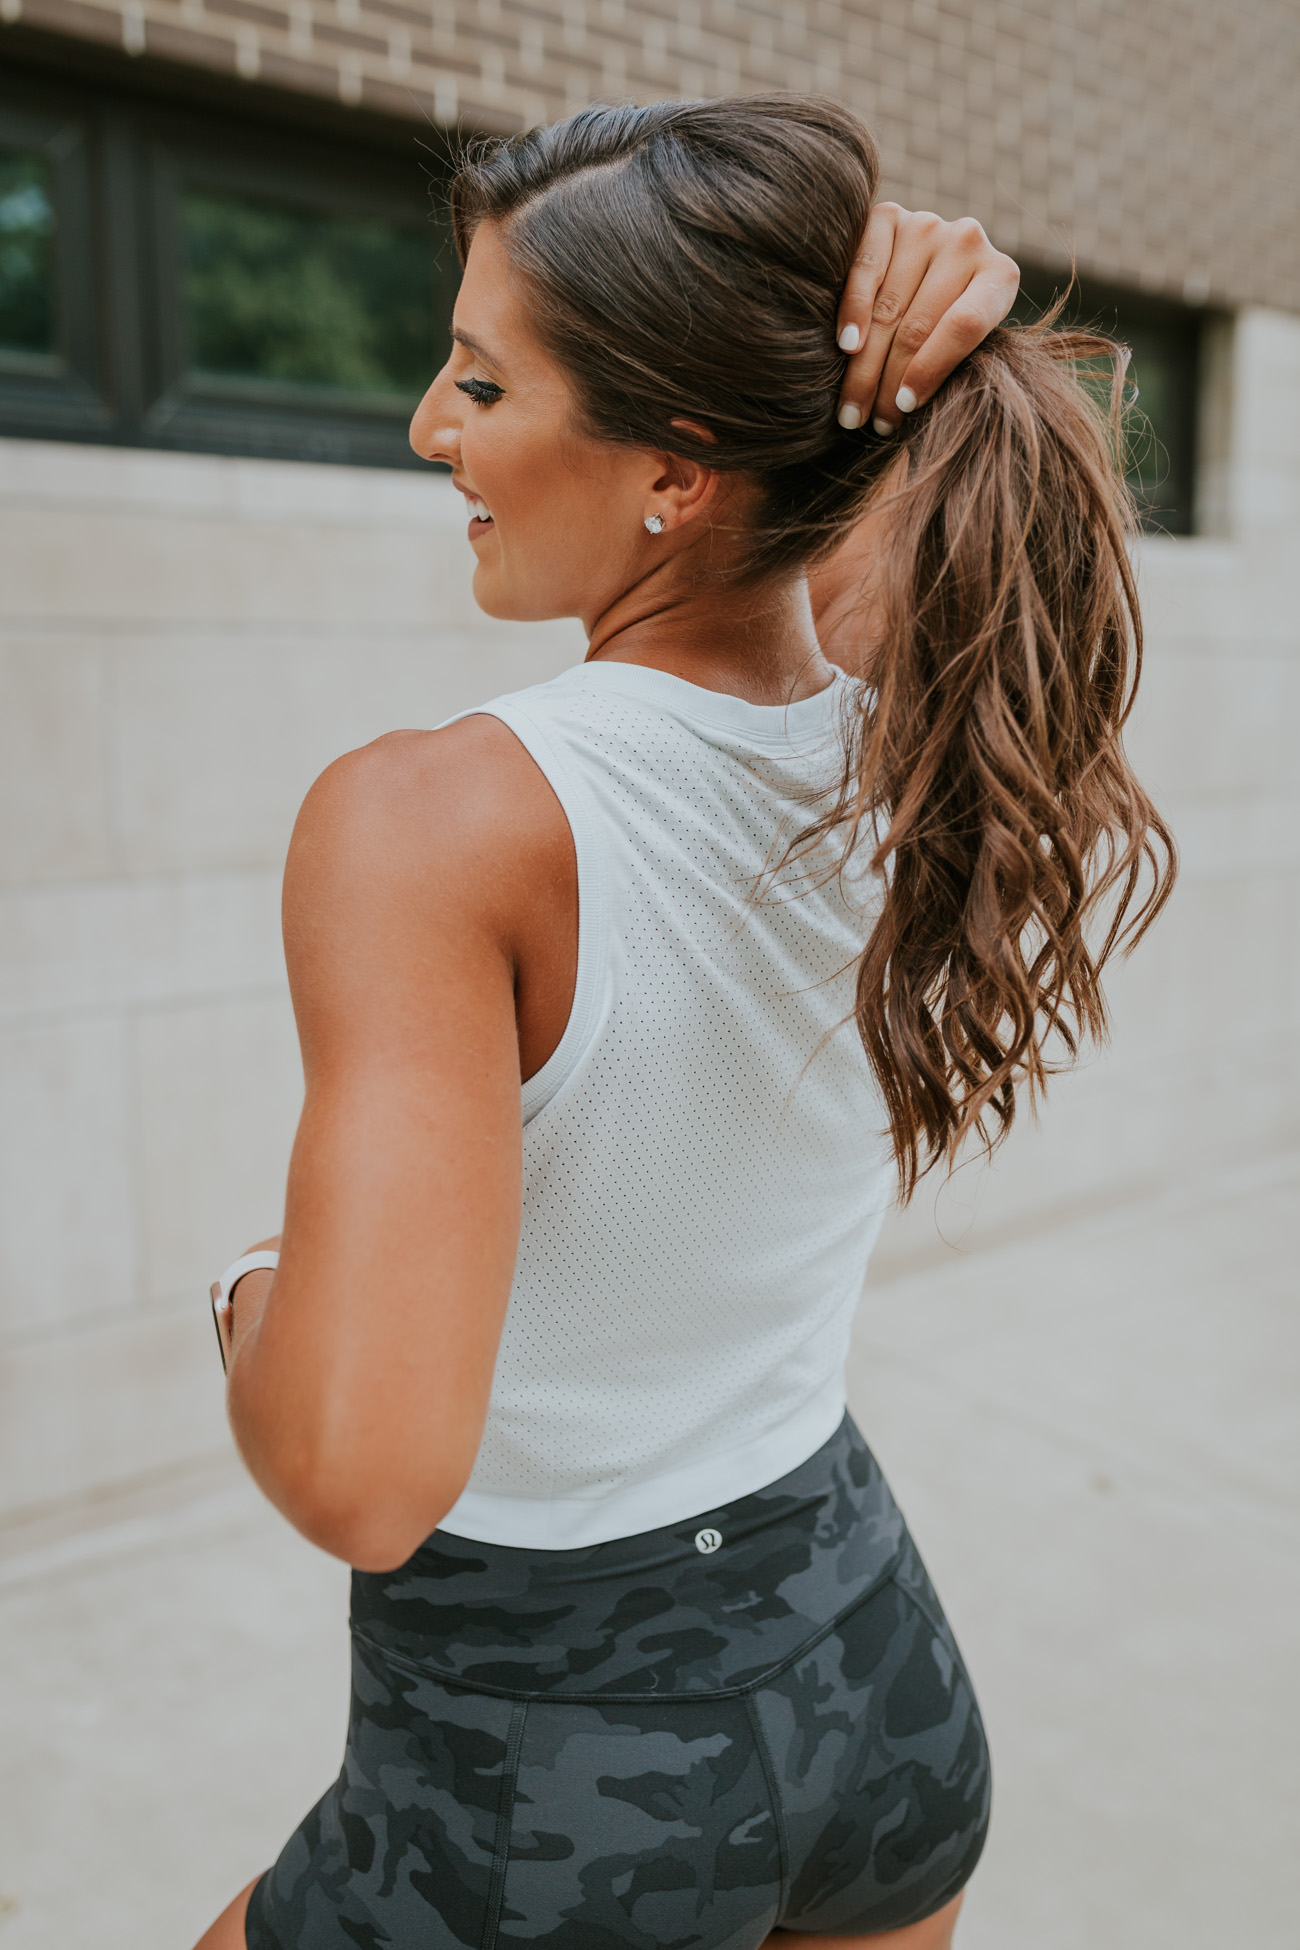 lululemon align shorts, up for it bra, lululemon activewear, muscle tank, athleisure, cute workout outfit, fitwithasd // grace white a southern drawl